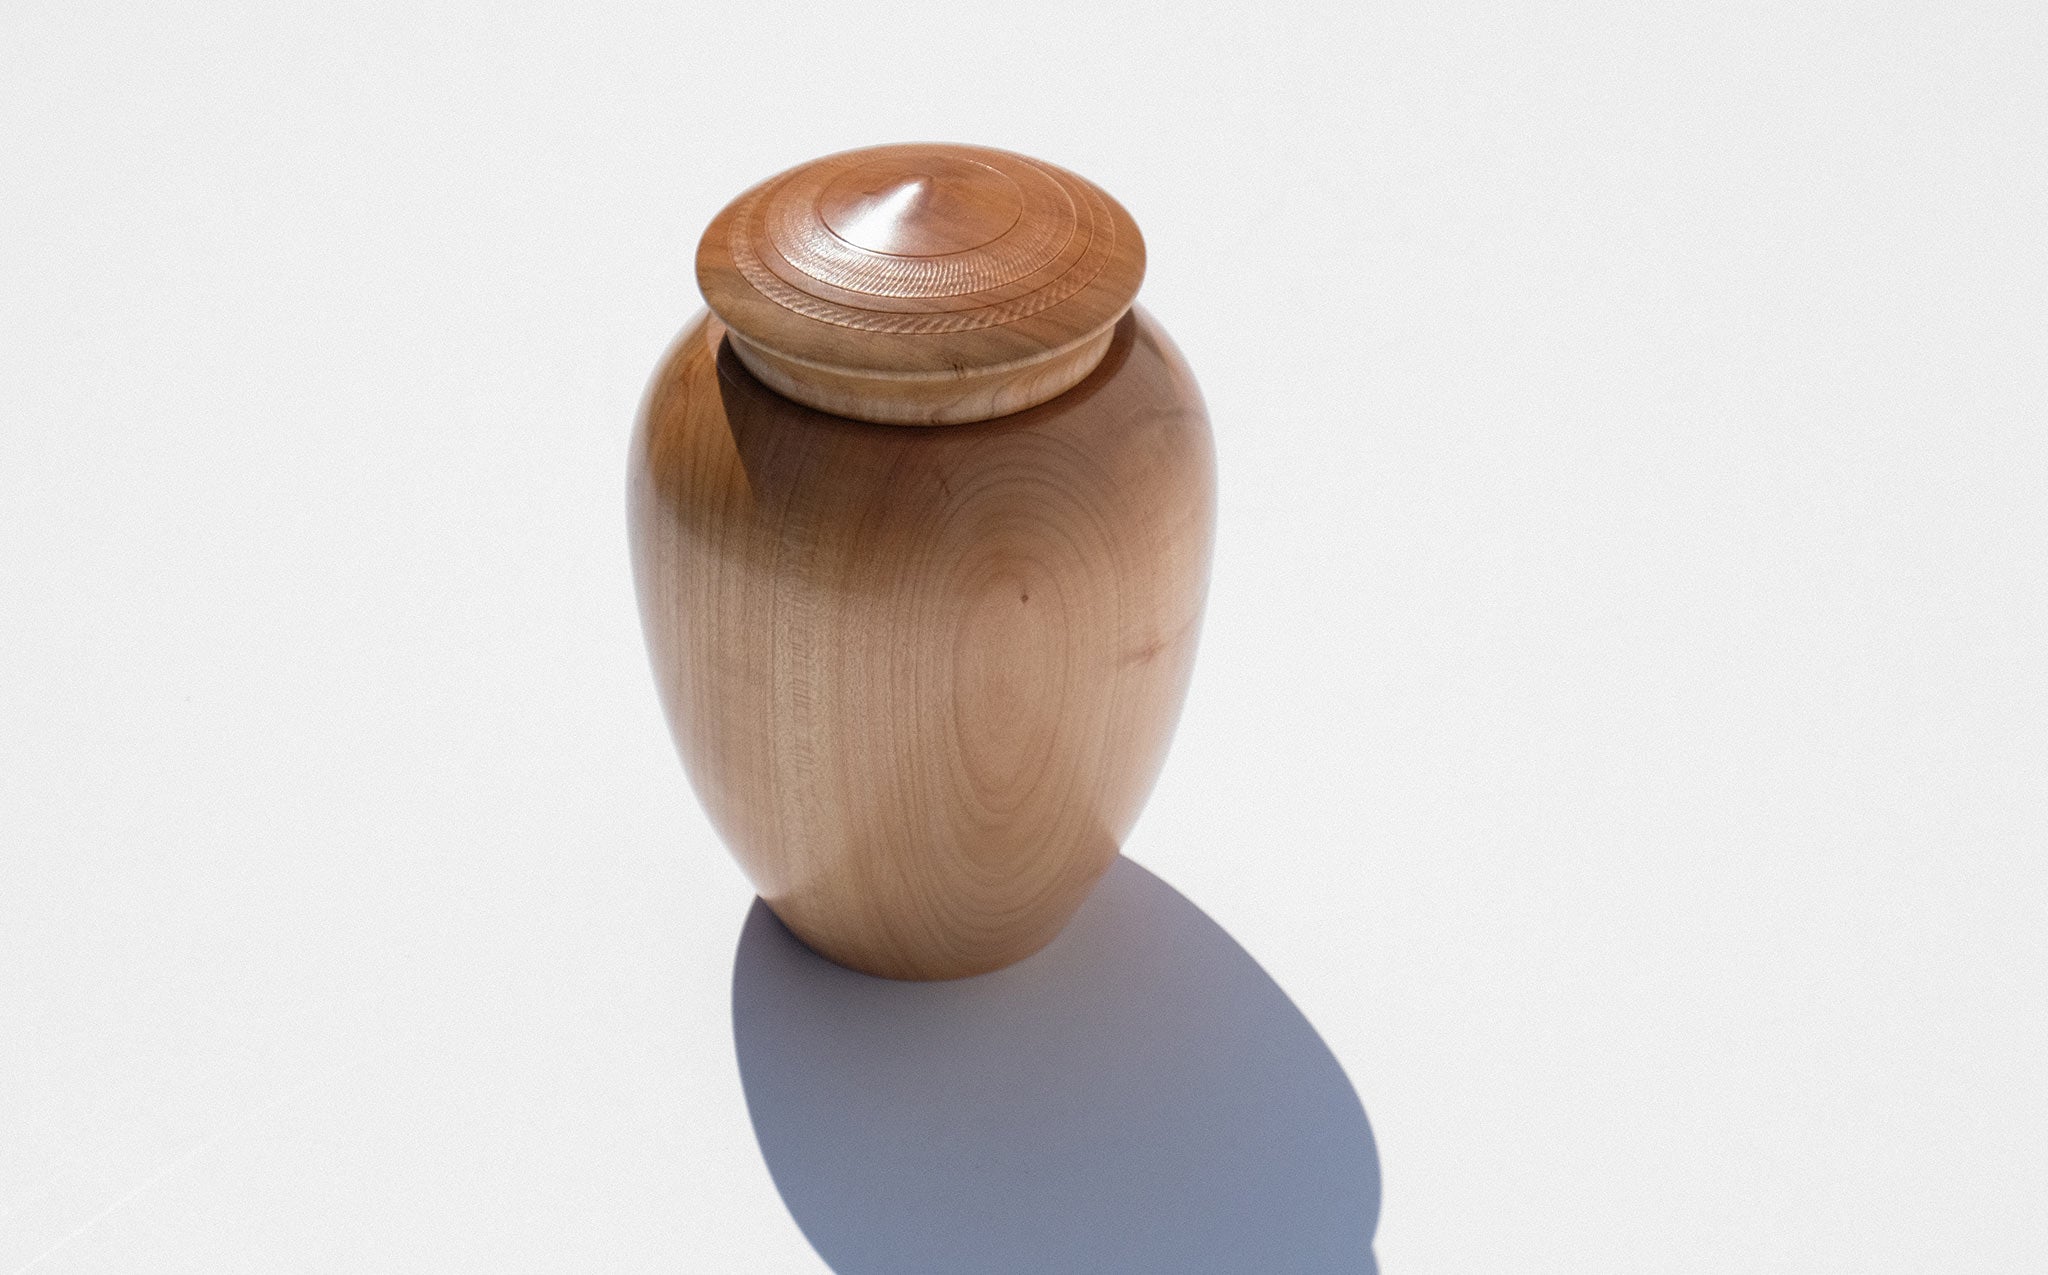 Bruce Perlmutter Hand Lathed Maple Vessel